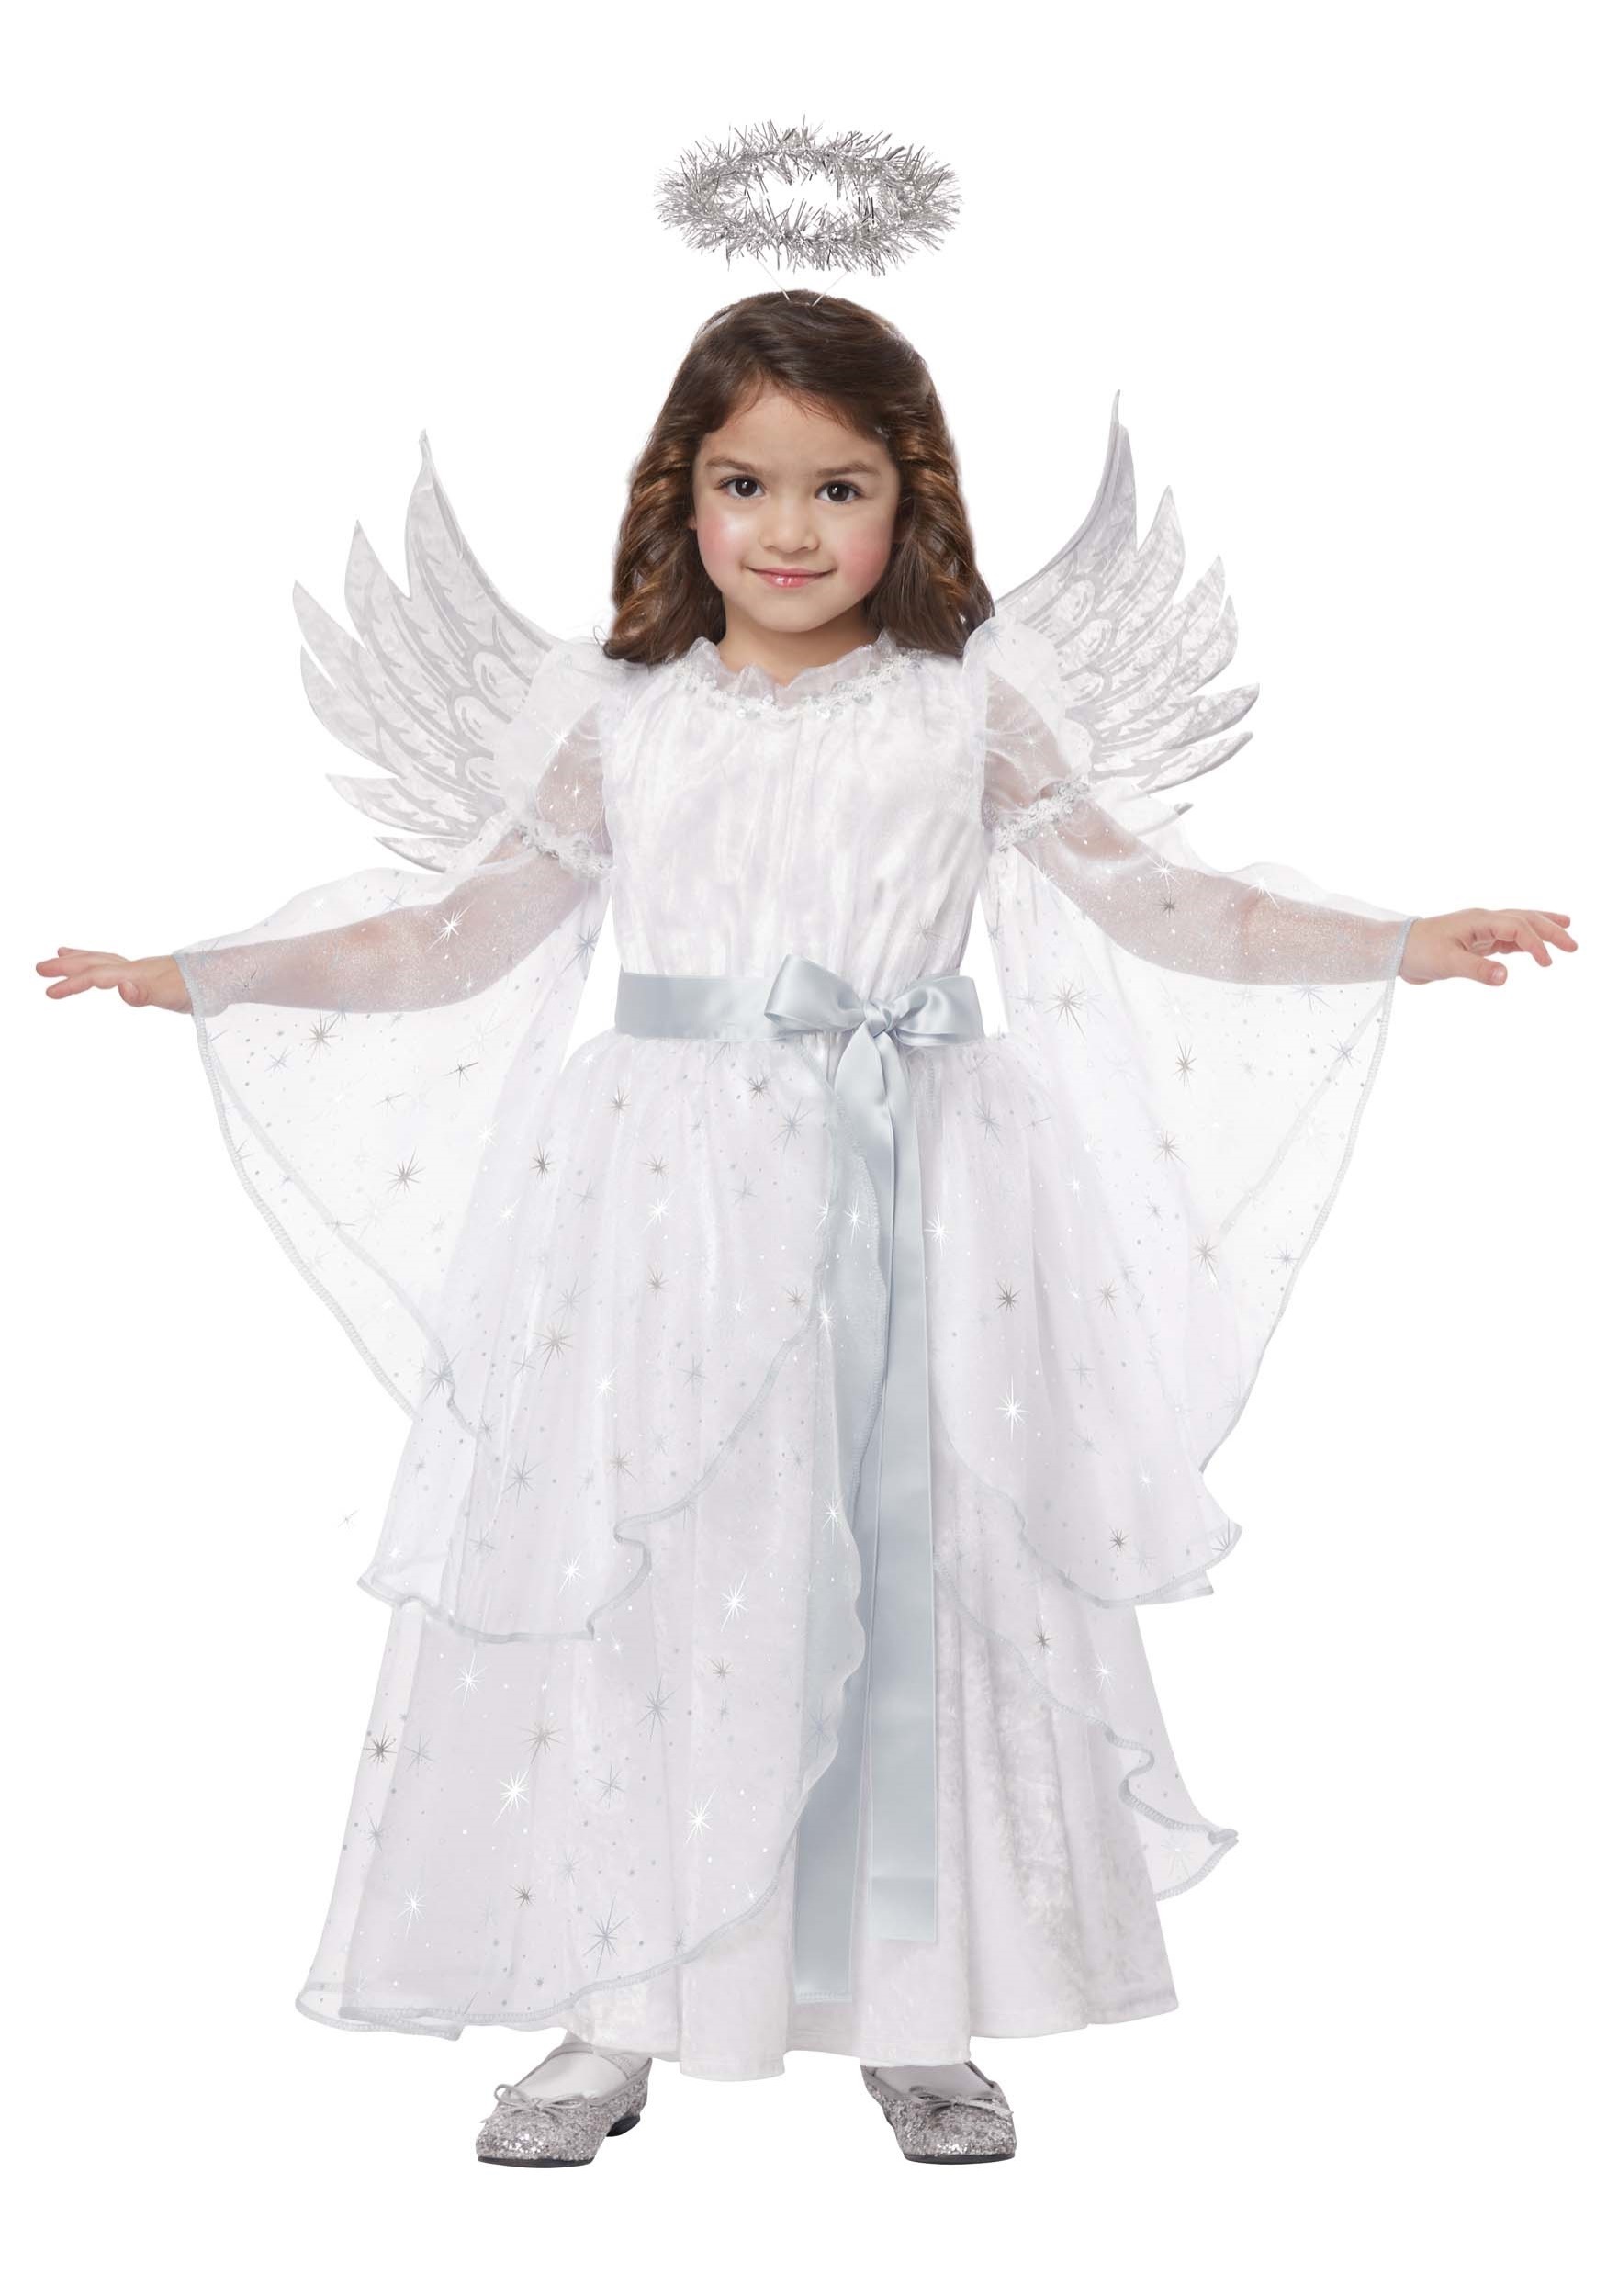 Photos - Fancy Dress California Costume Collection Starlight Angel Toddler Costume Gray/Whi 